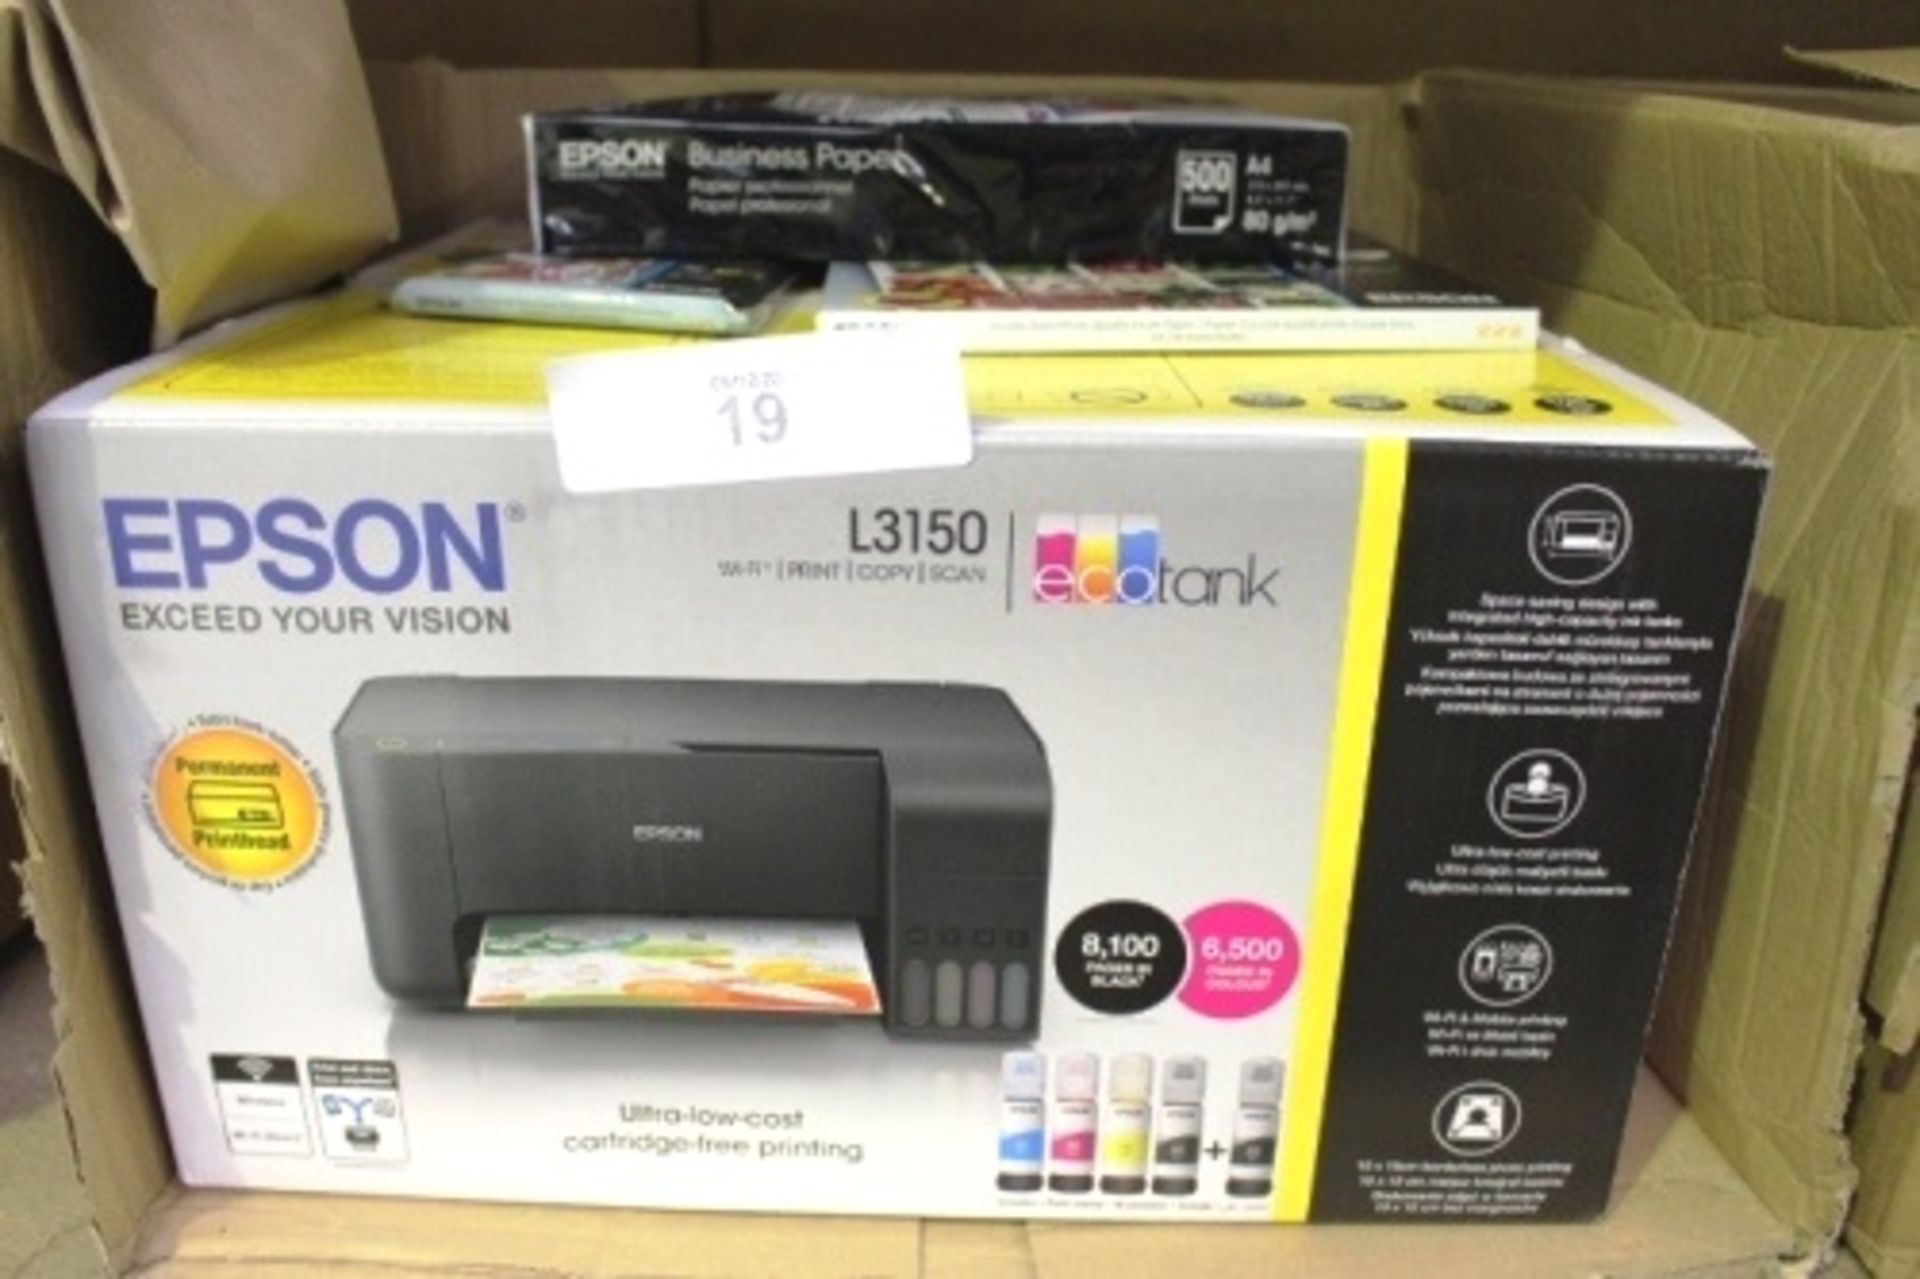 An Epson home printer, model L3150, together with a selection of Epson paper - Sealed new in box (